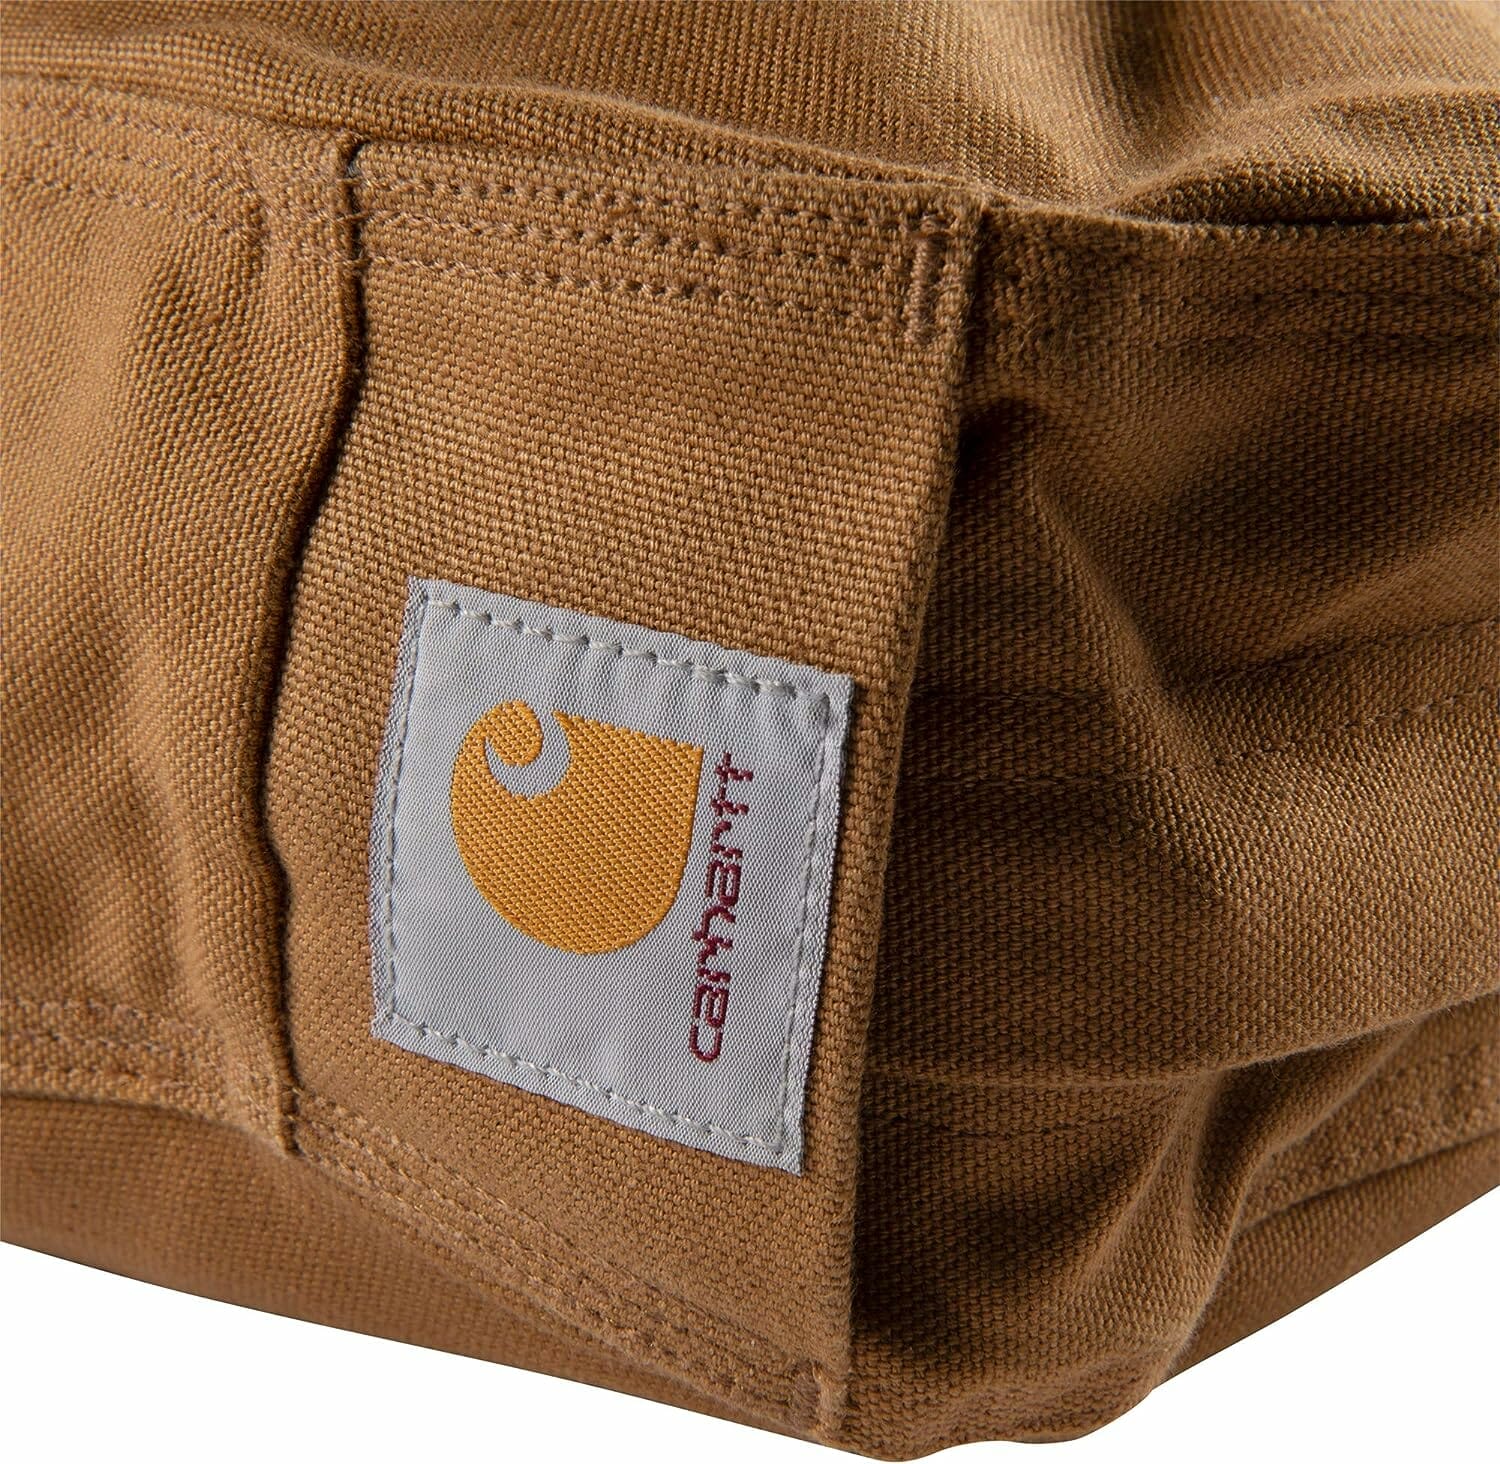 Carhartt Dog Bed Review – The Perfect Resting Solution?